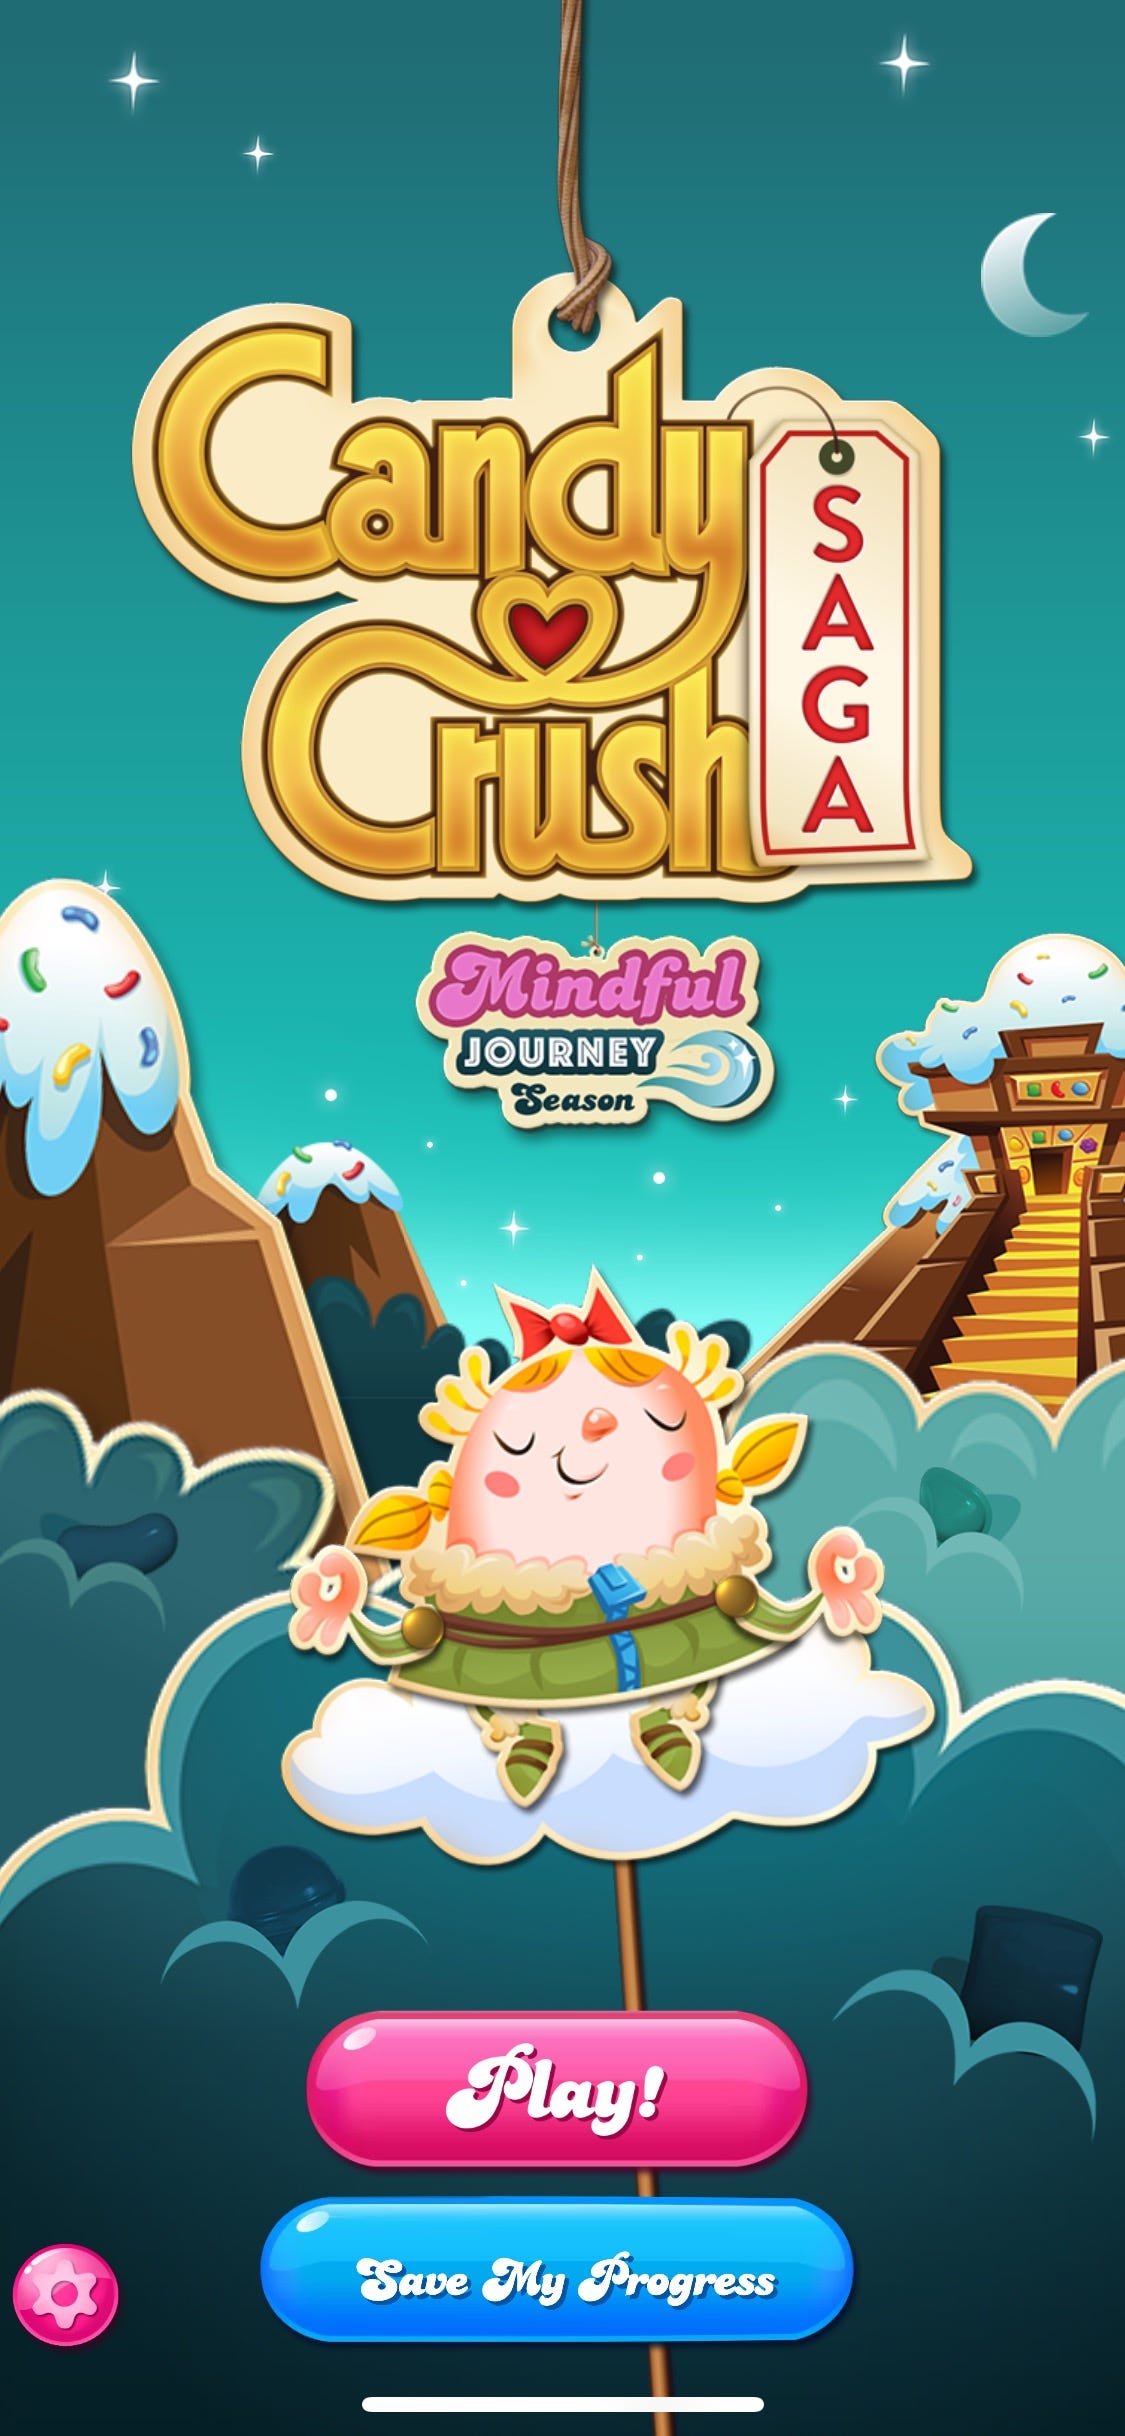 Does King Need Another Candy Crush? Probably. - Vox